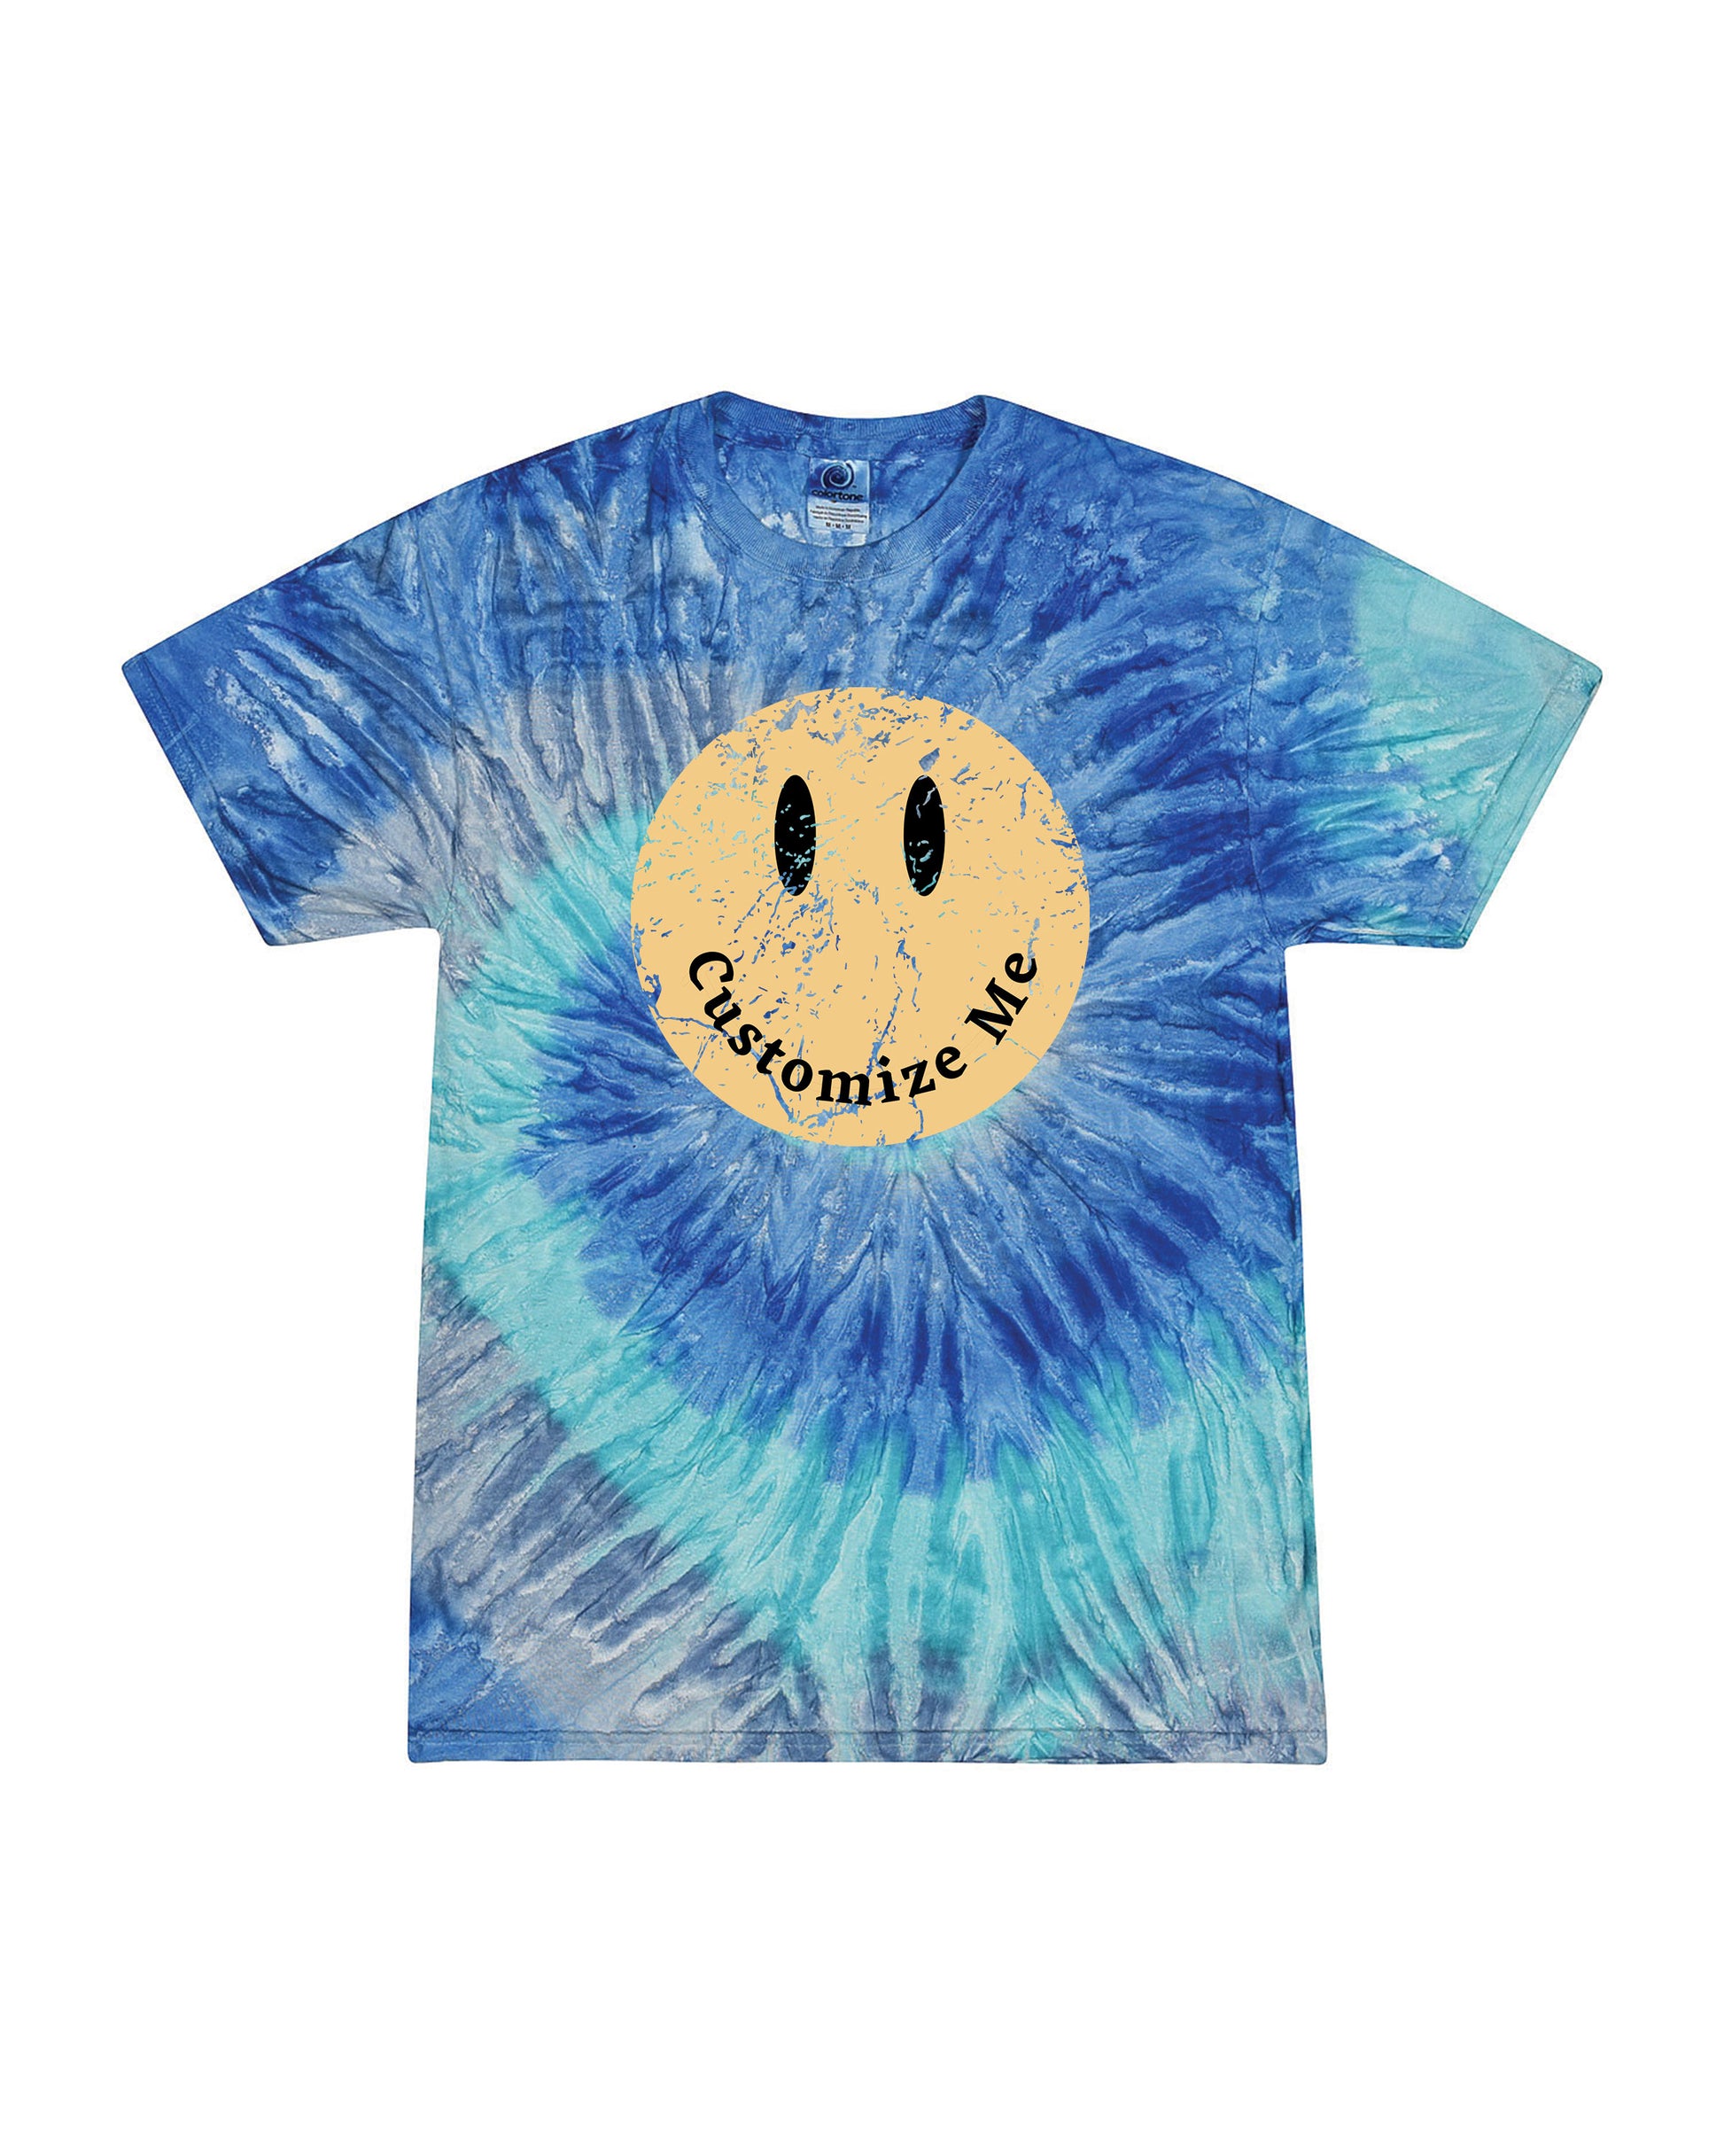 Tie Dye Customizable Happy Face | Tee | Adult-Adult Tee-Sister Shirts-Sister Shirts, Cute & Custom Tees for Mama & Littles in Trussville, Alabama.